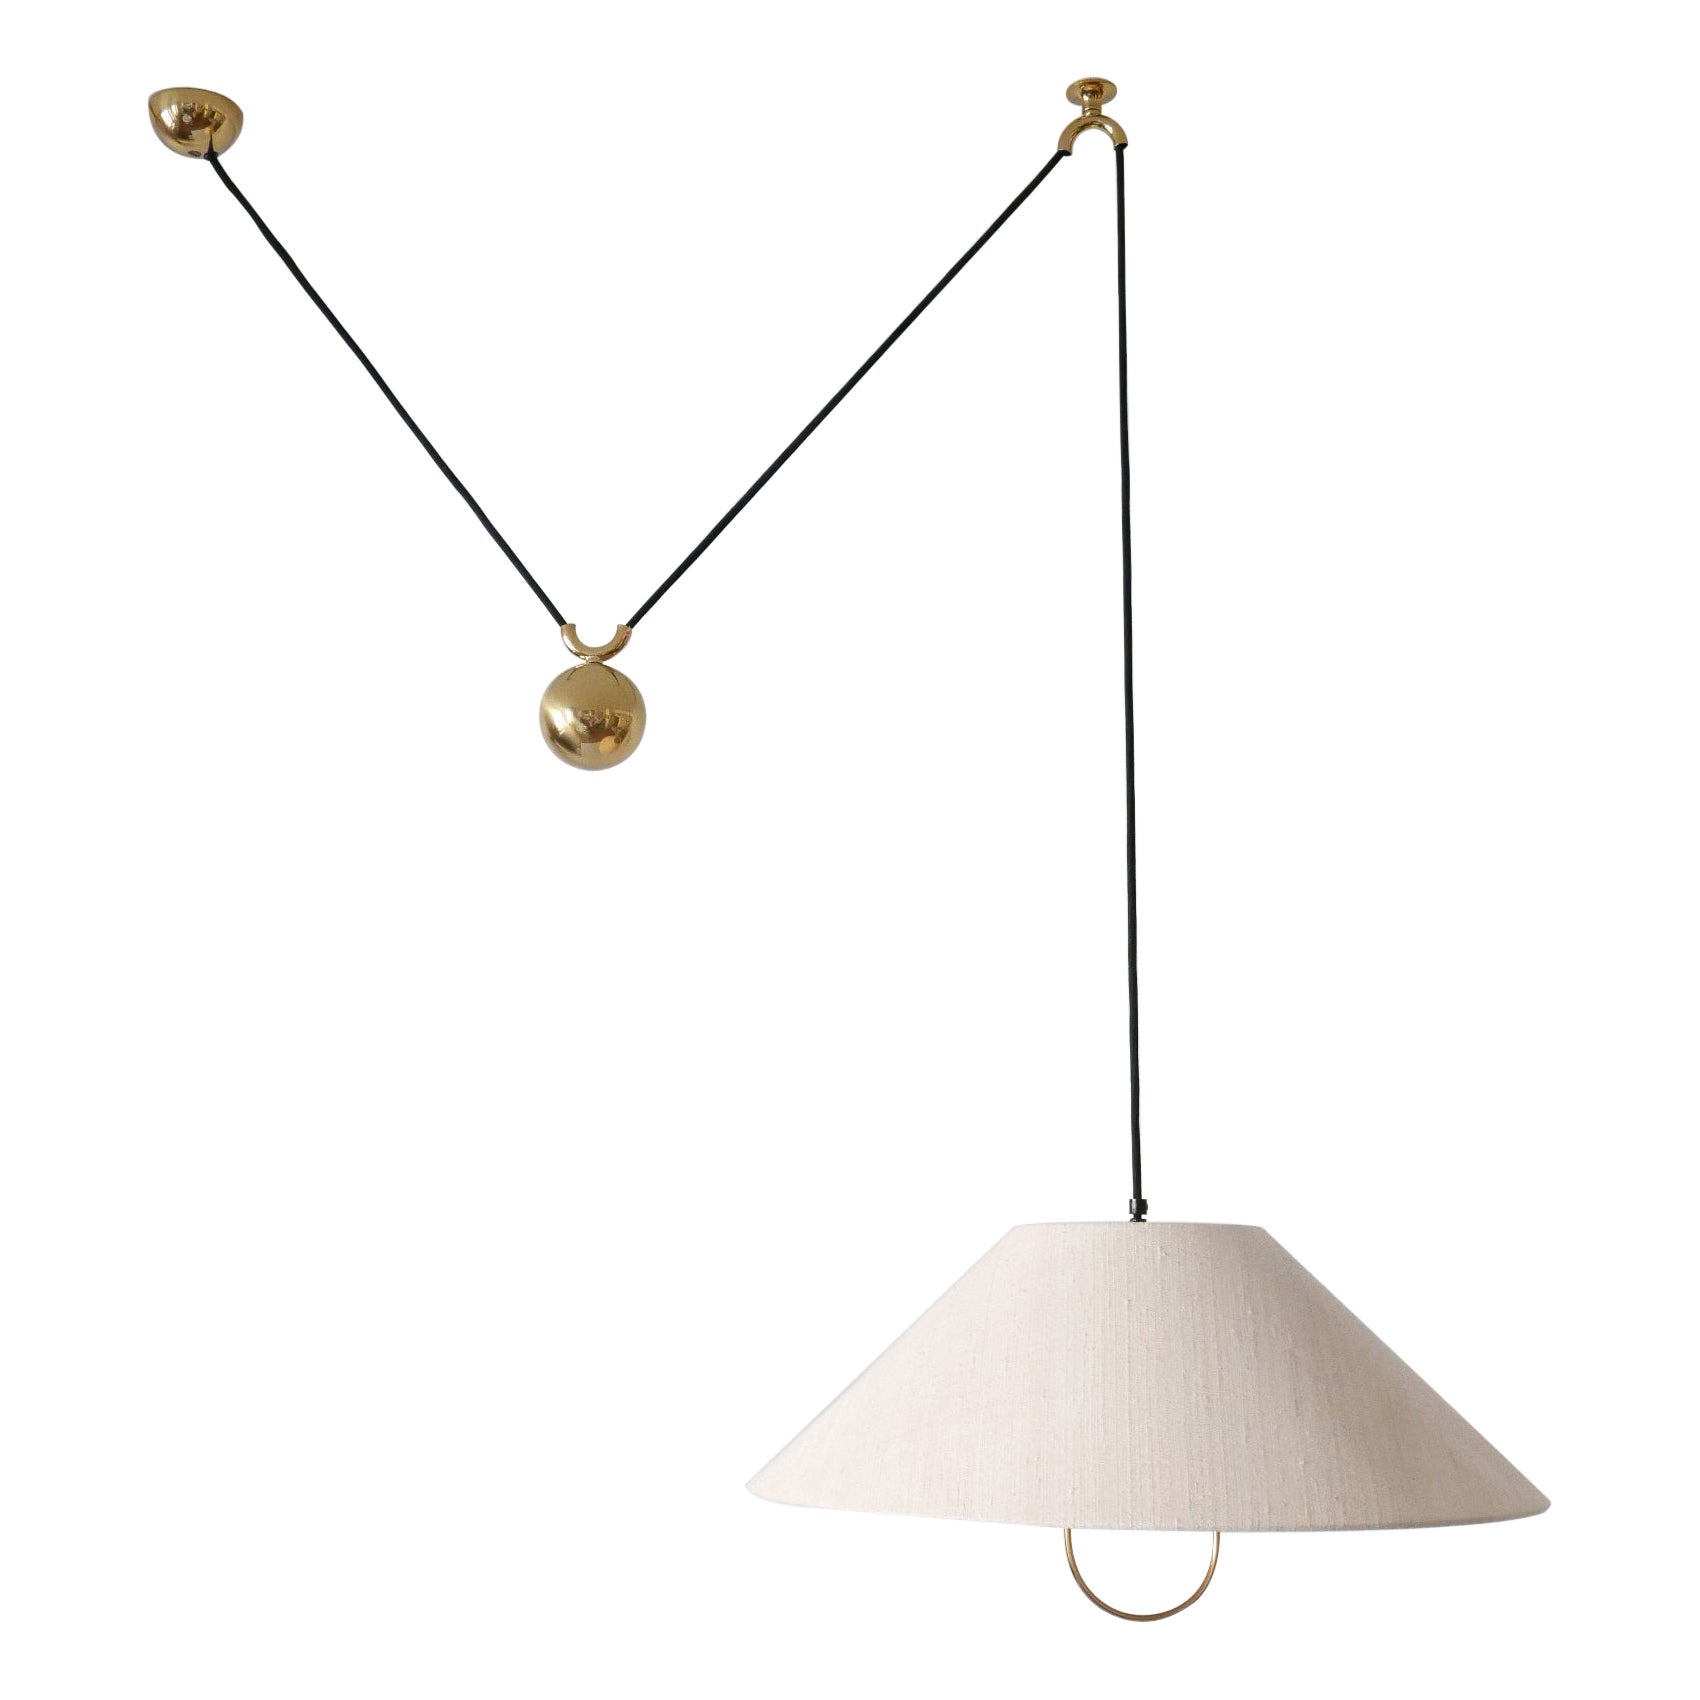 Rare & Early Counterweight Pendant Lamp by Florian Schulz Germany, 1960s